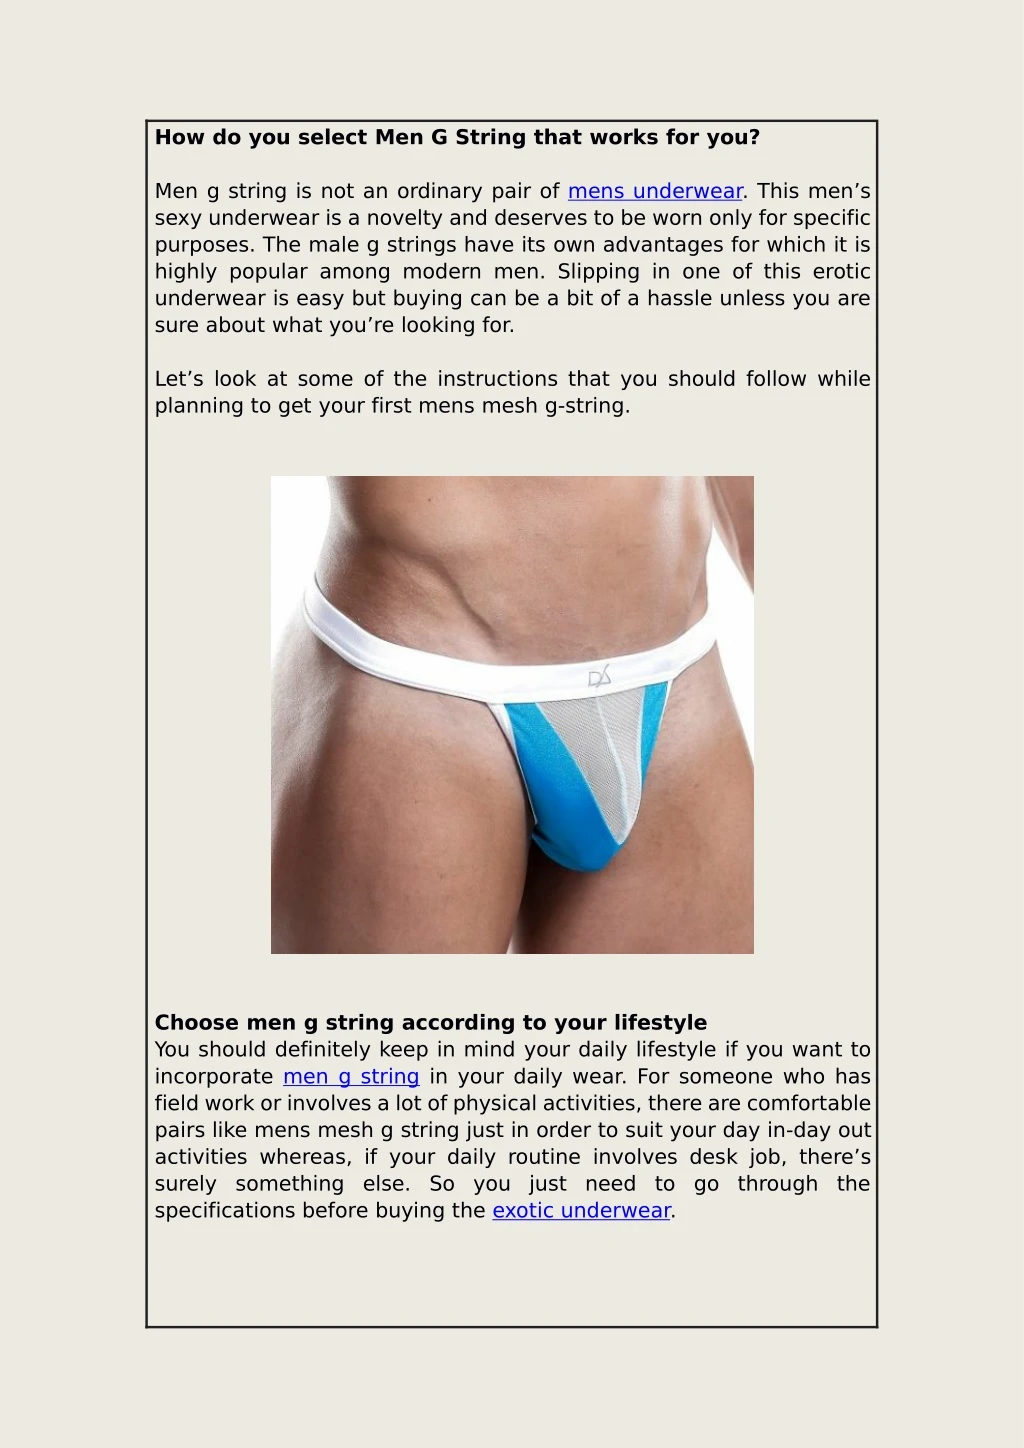 how do you select men g string that works for you